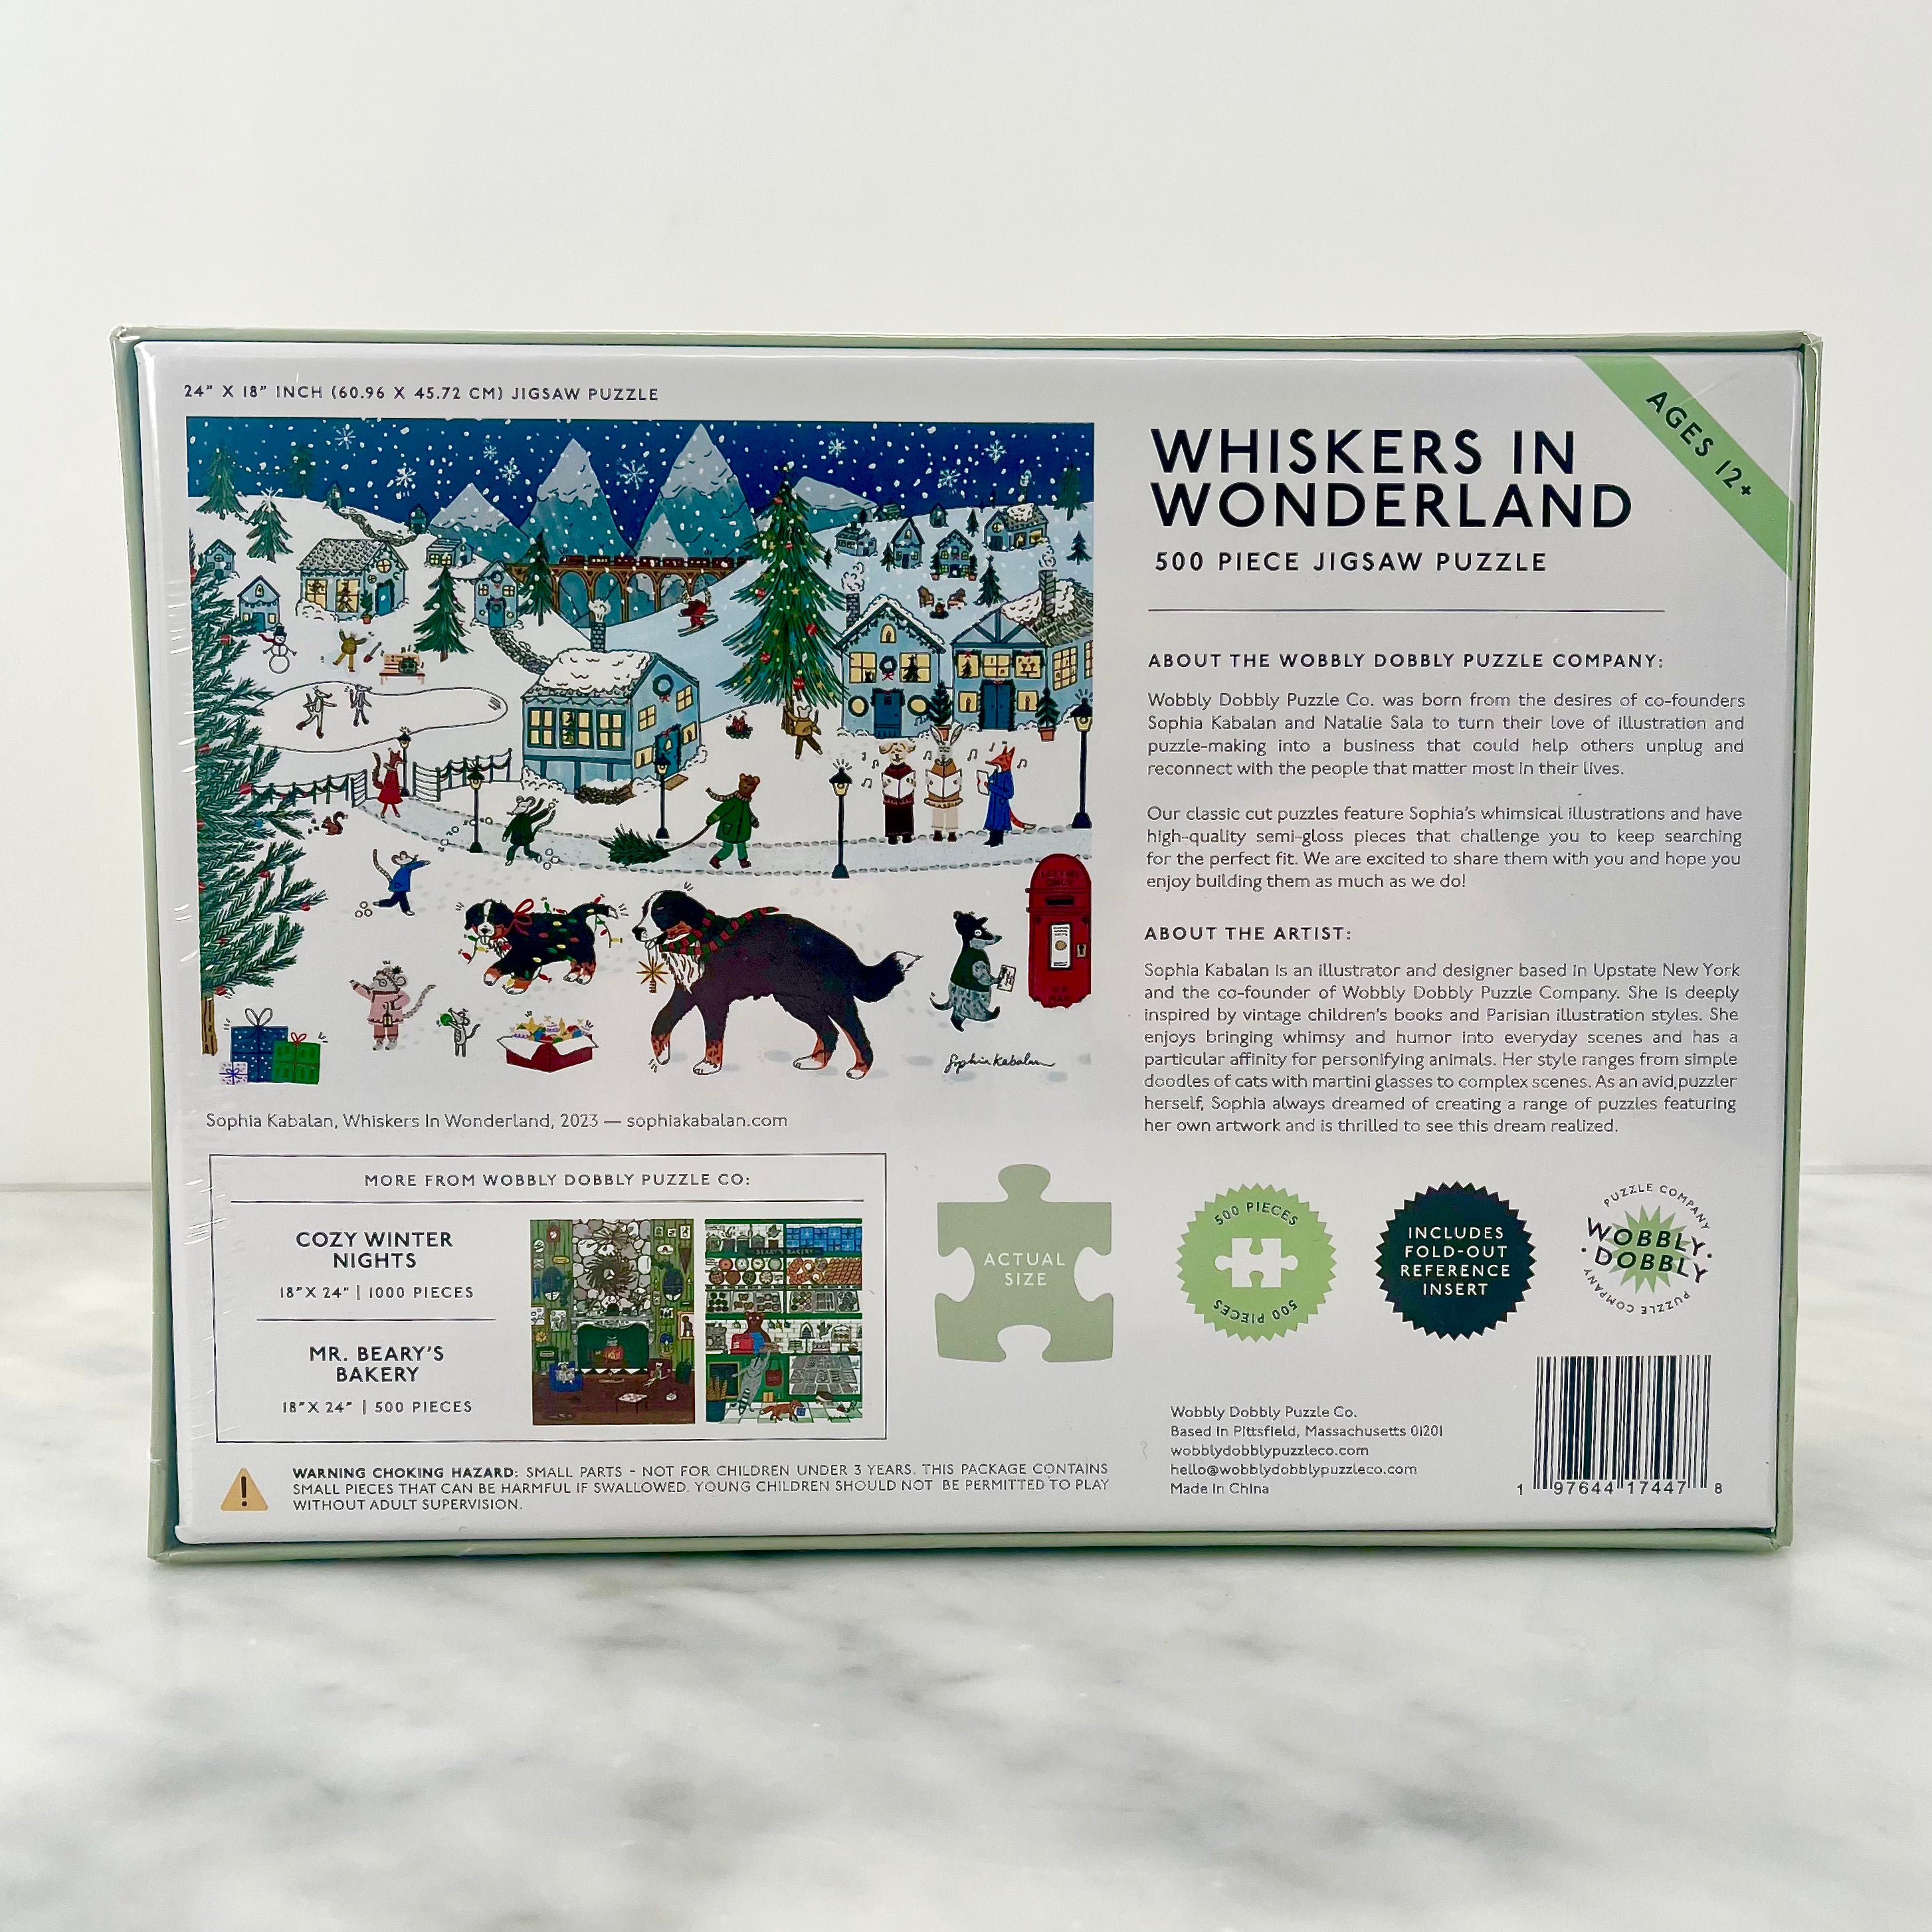 Whiskers in Wonderland - Wobbly Dobbly Puzzle Company